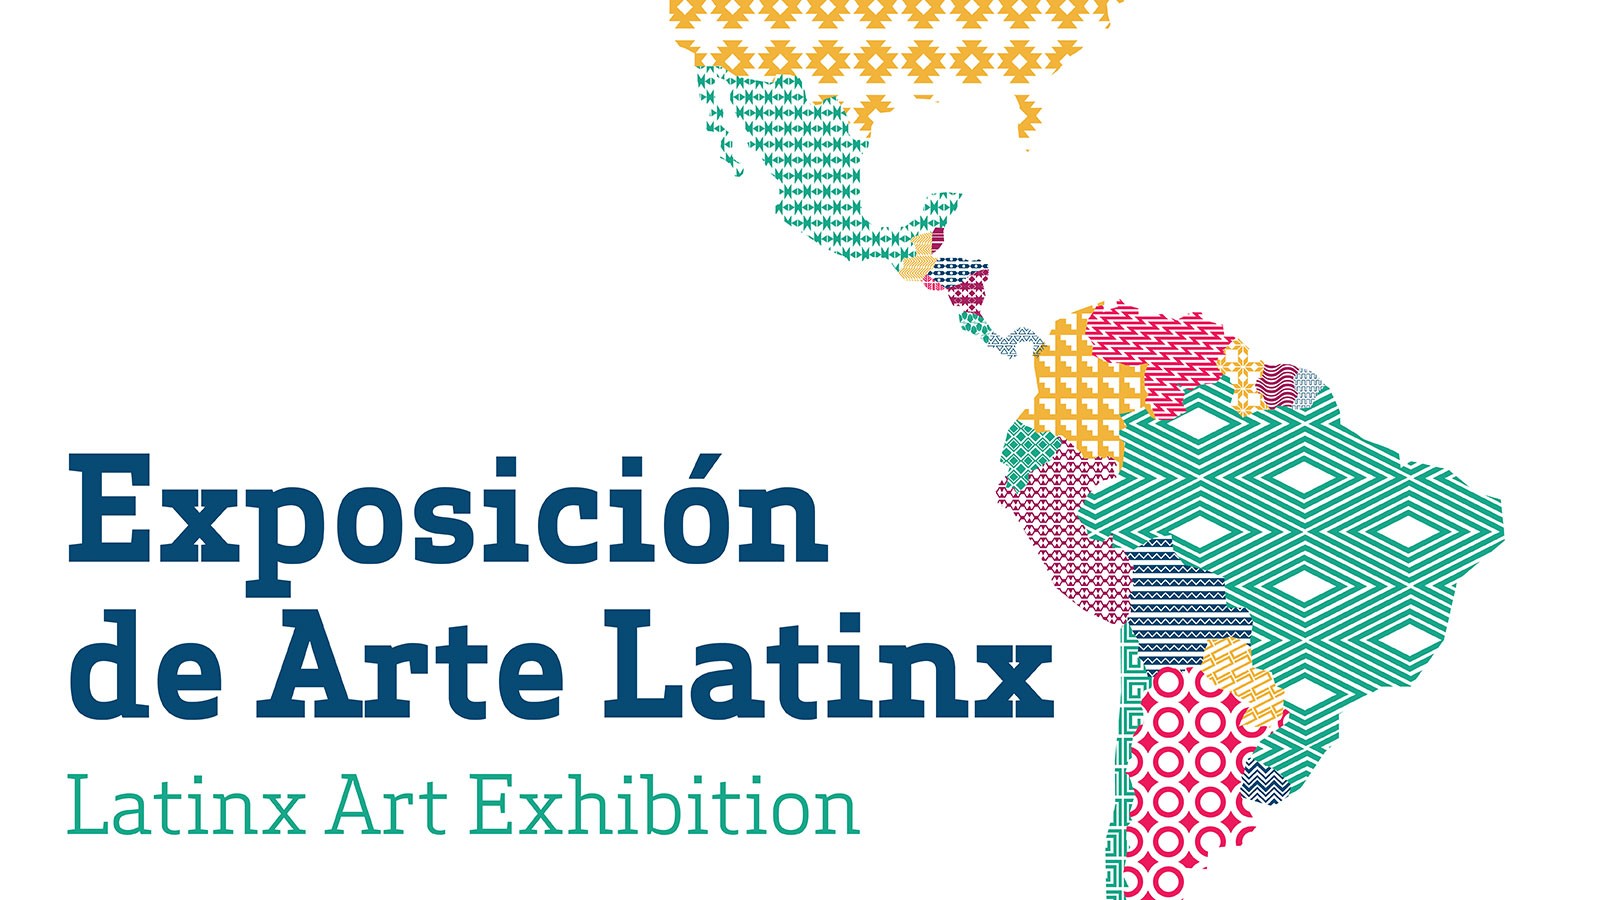 Text Reads: Latinx Art Exposition with an image of a map of Central and South America